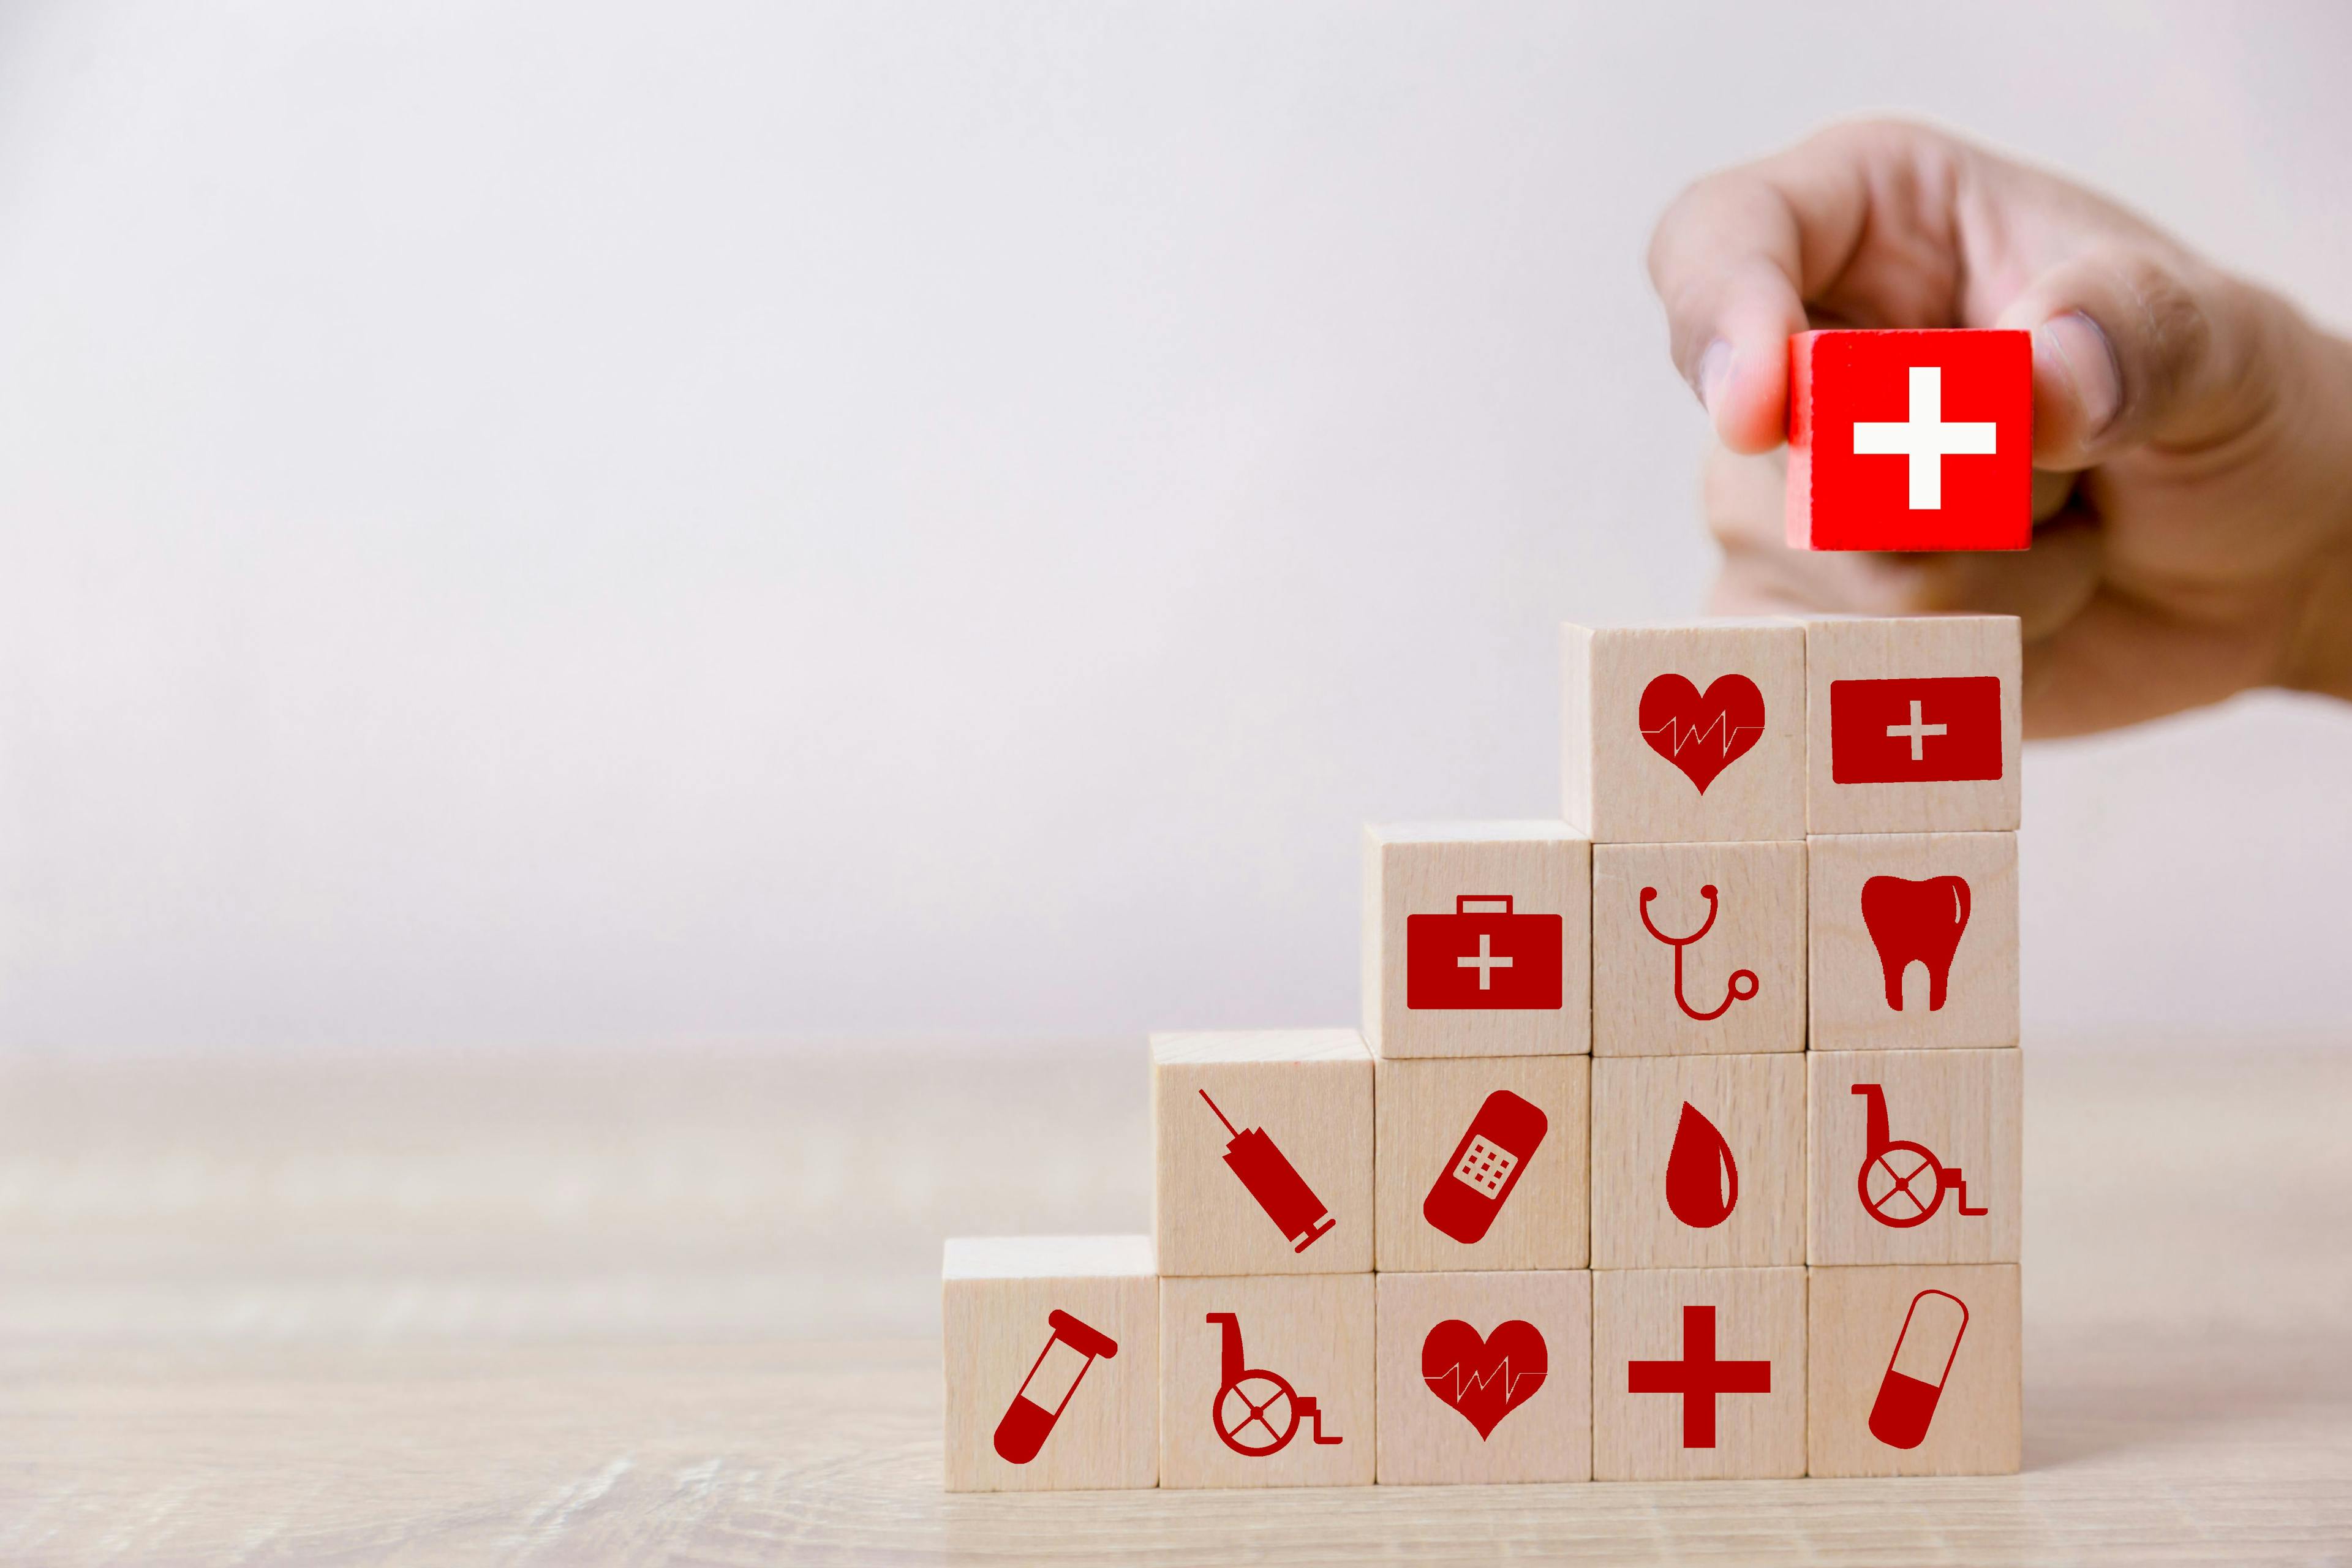 Wooden blocks with health care icons | Image credit: A stockphoto - stock.adobe.com